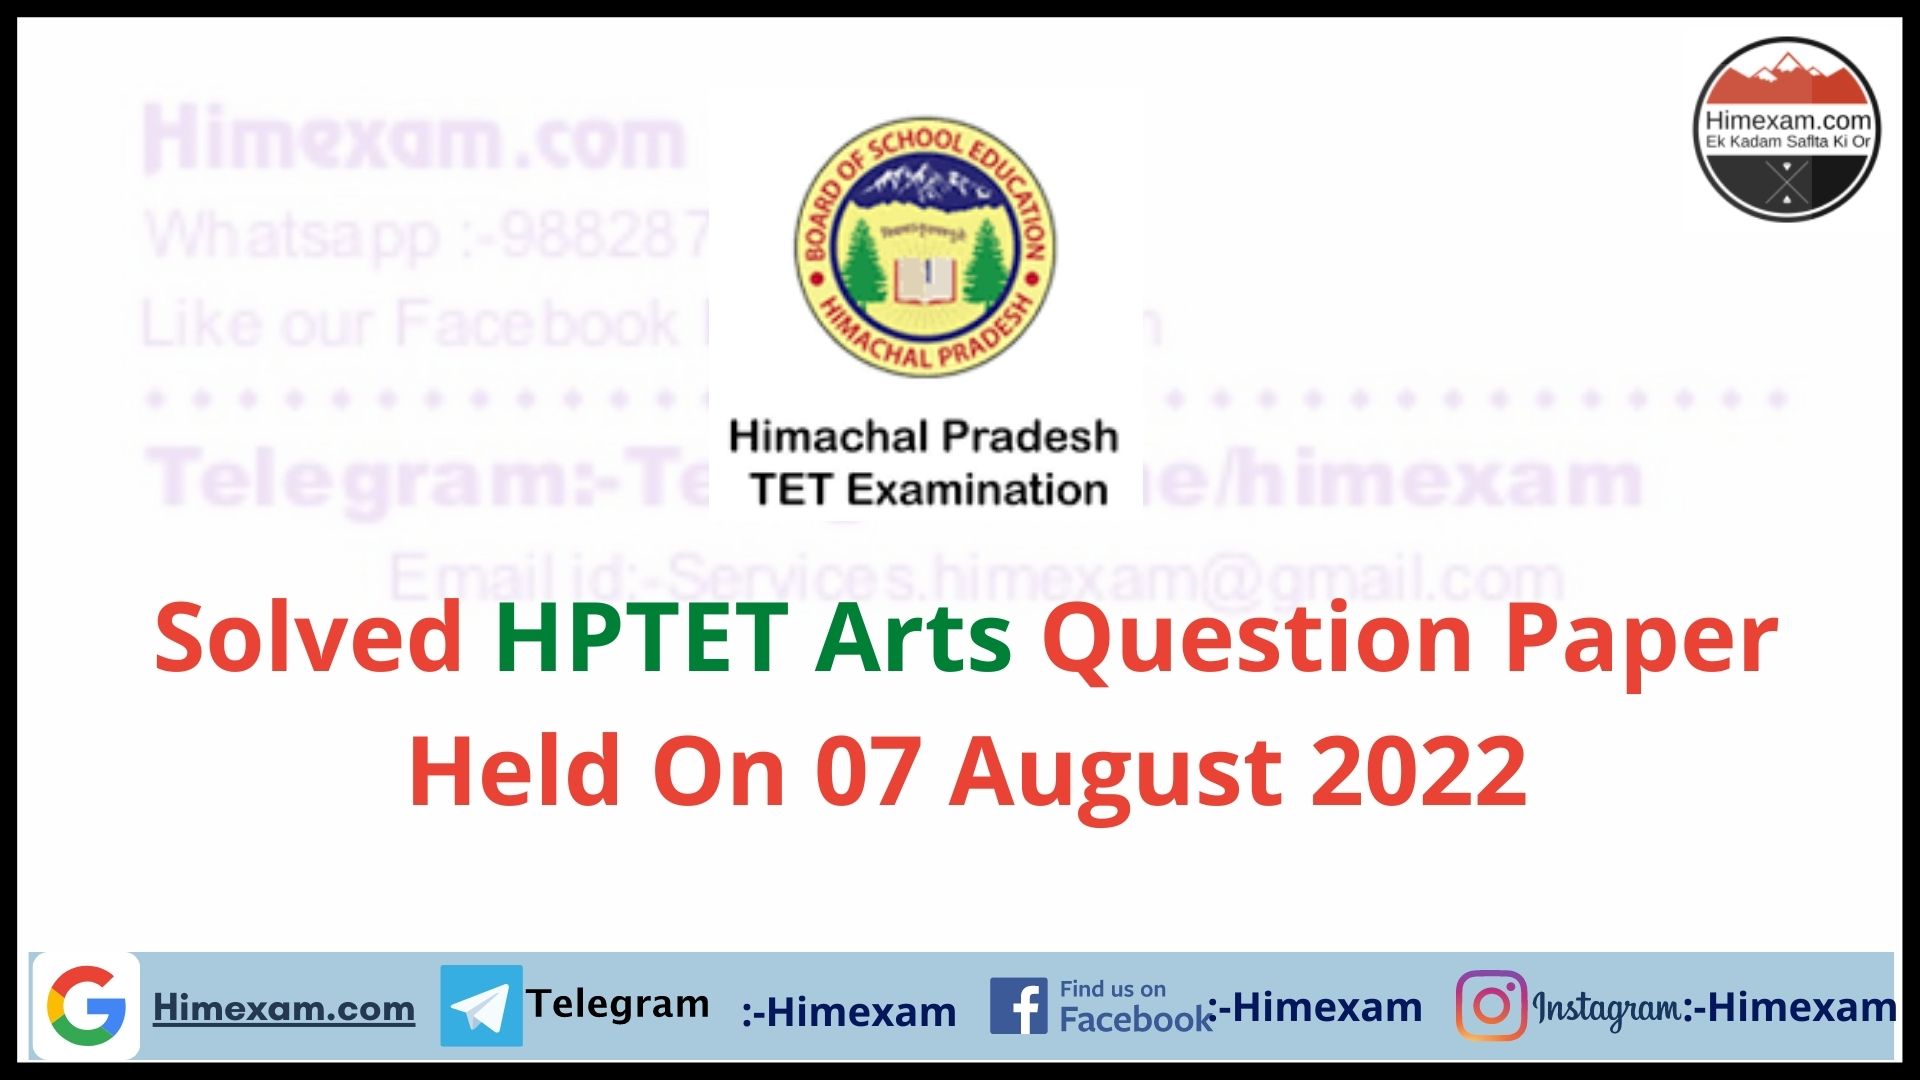 Solved HPTET Arts Question Paper Held On 07 August 2022